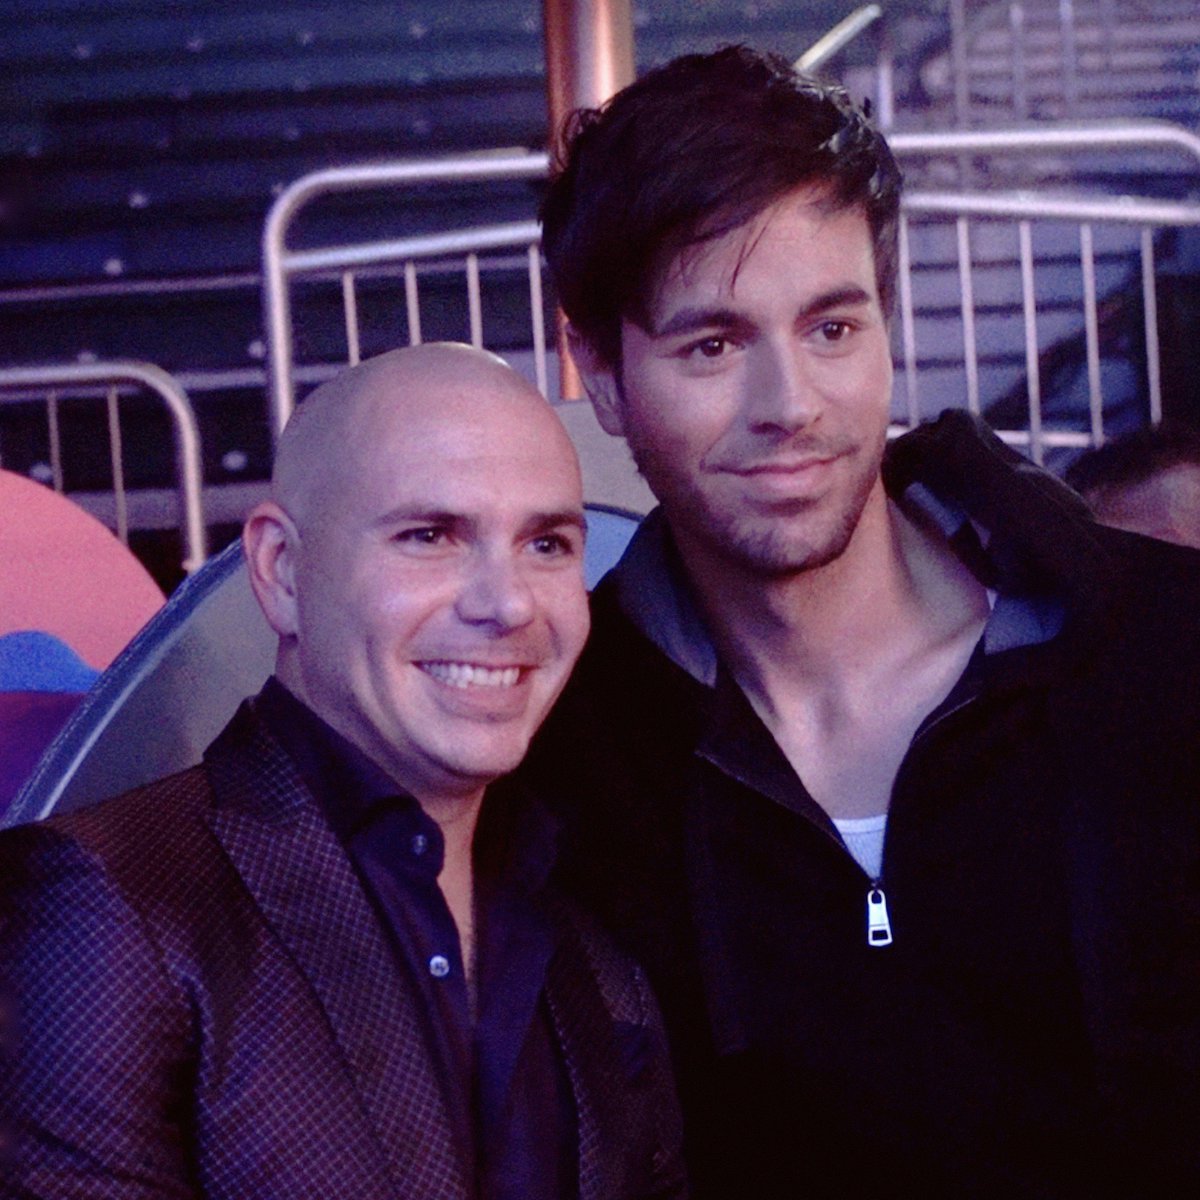 #TBT @enriqueiglesias and yours truly are hitting the road again next month #EnriquePitbullTour https://t.co/ujvBUqWNrf